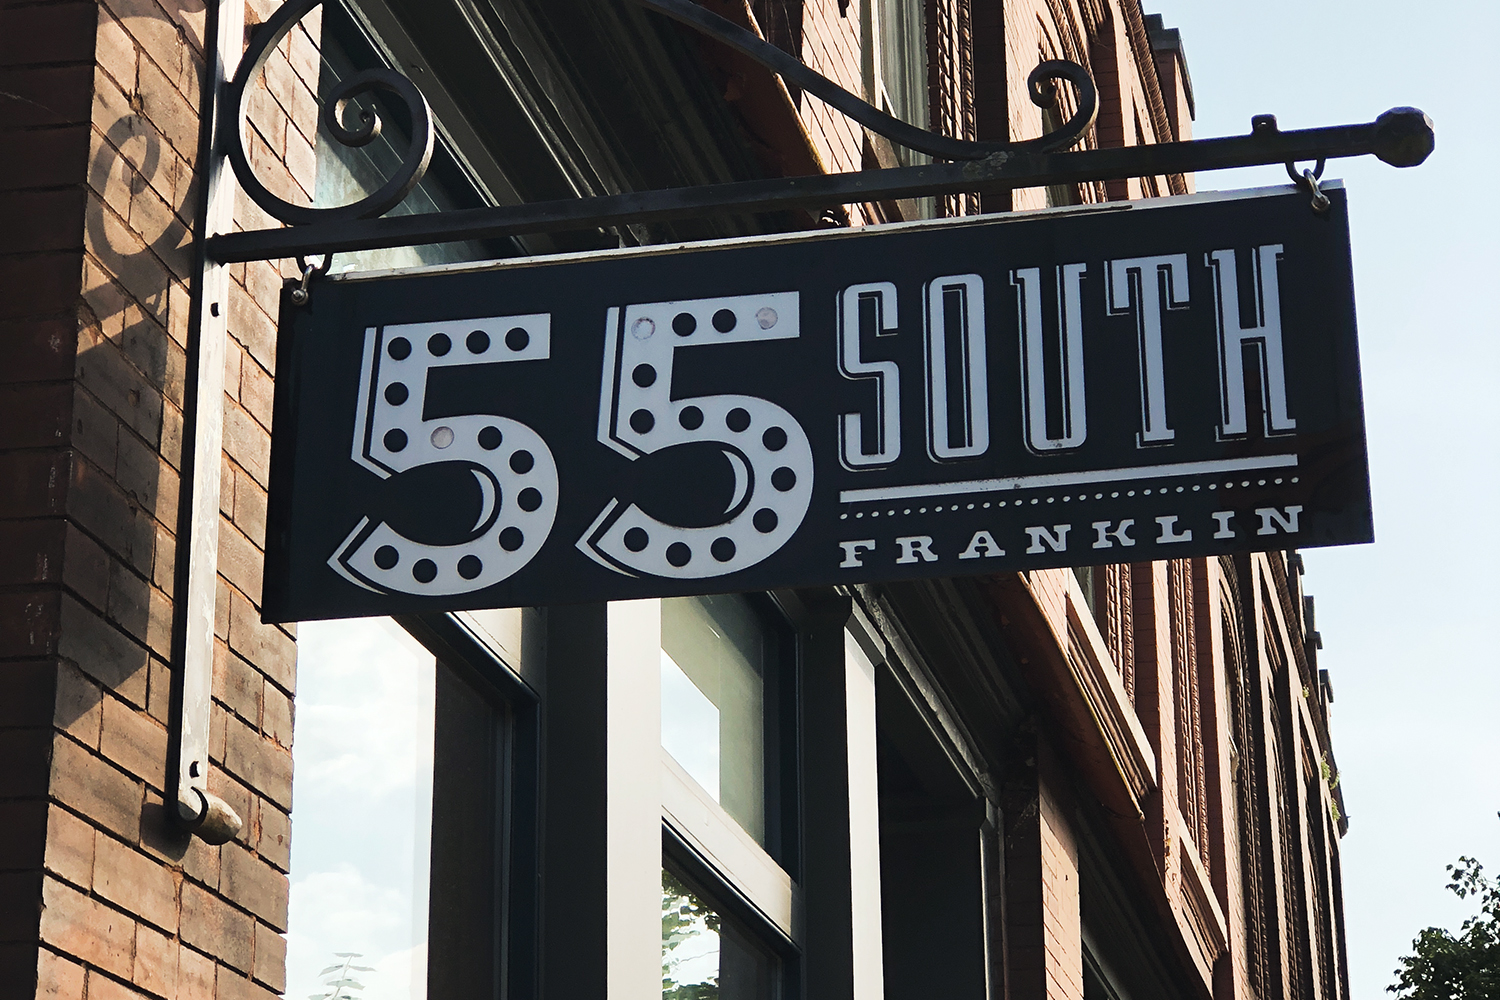 Date night on Franklin Main Street. They call it America's favorite main street and one visit and you can absolutely see why. The most quaint place and I still can't believe this town is home now. Catch our favorite stores we found and the fabulous dinner we had at 55South! #FranklinTennessee #ThingsToDoInFranklin #FranklinMainStreet